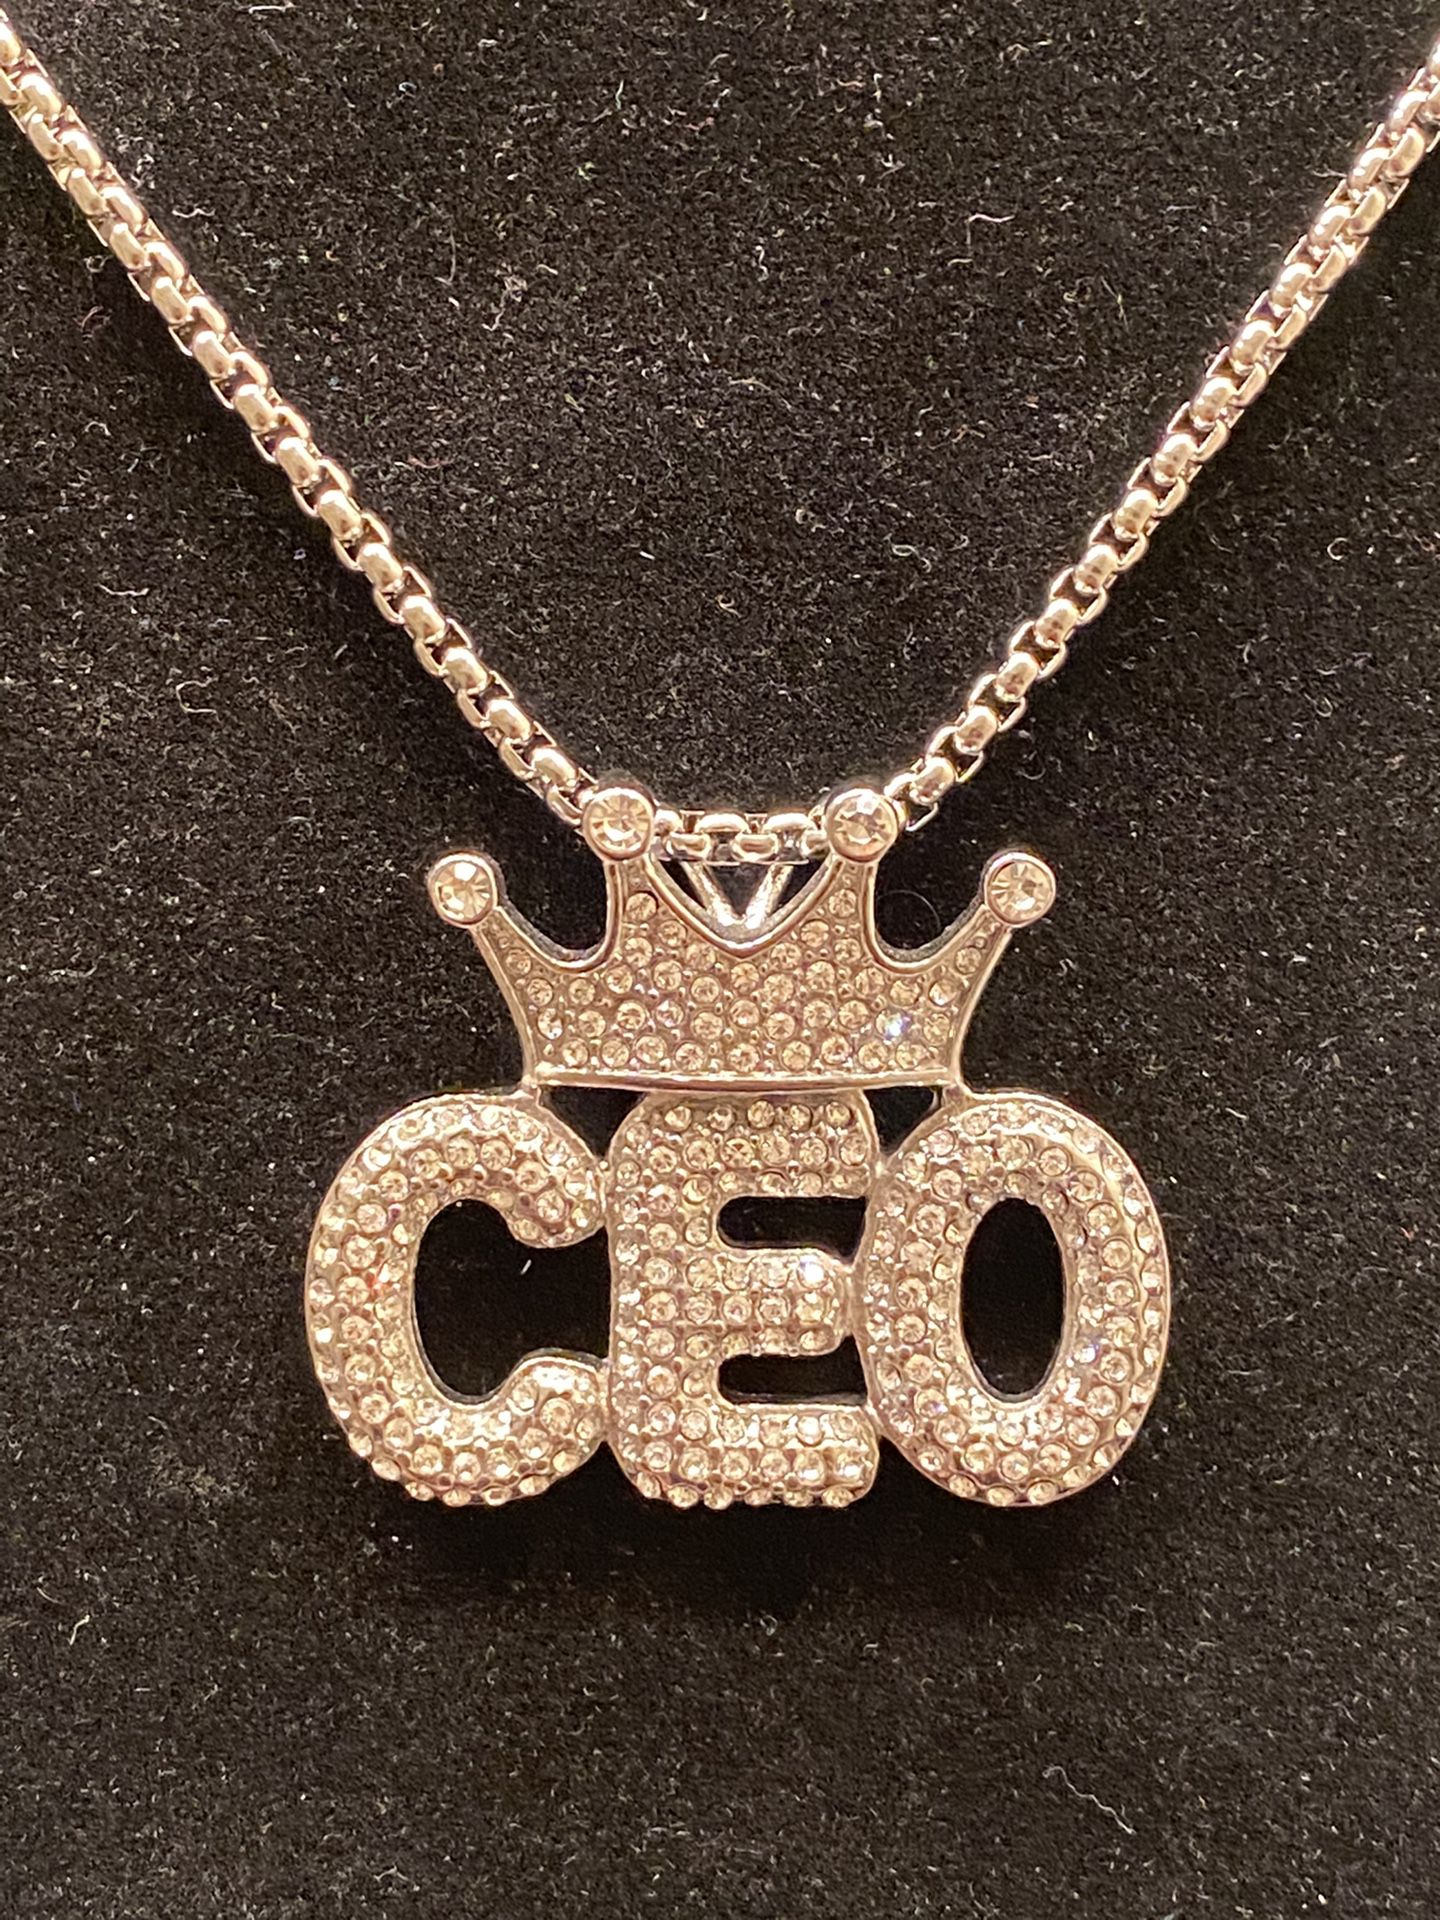 Stainless steel CEO pendant with chain